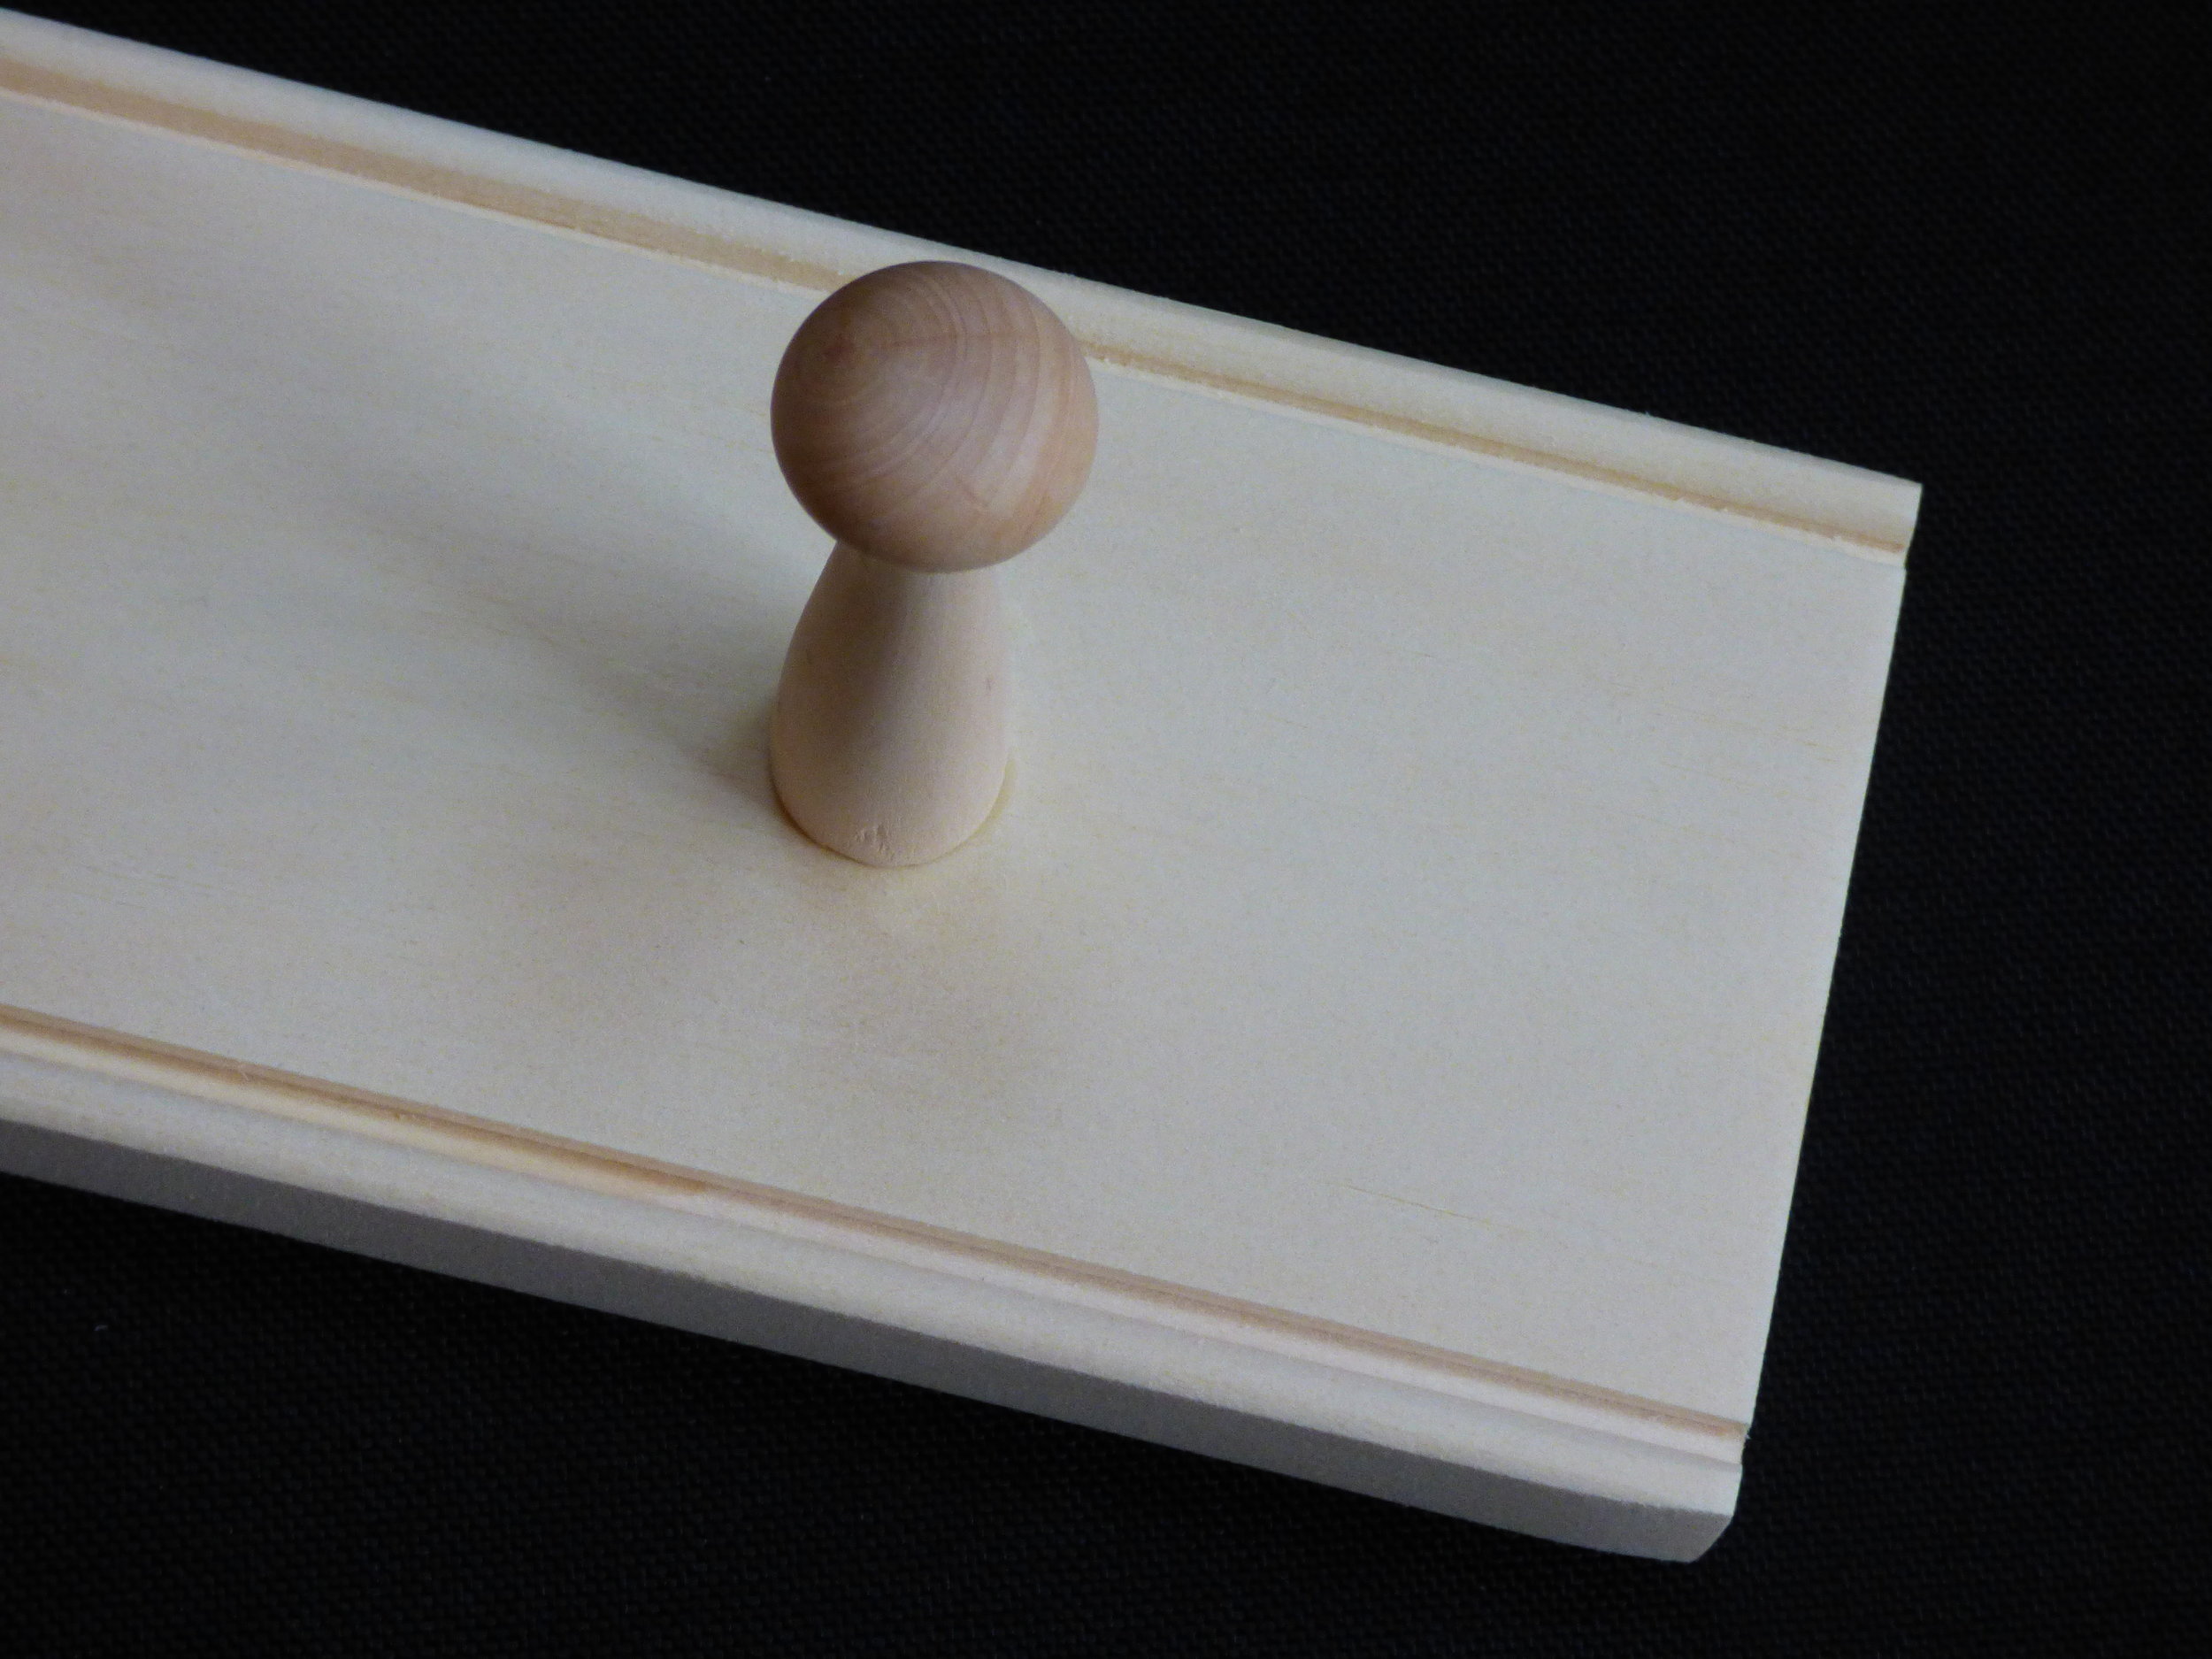 Shaker Pegs - Maple and Cherry